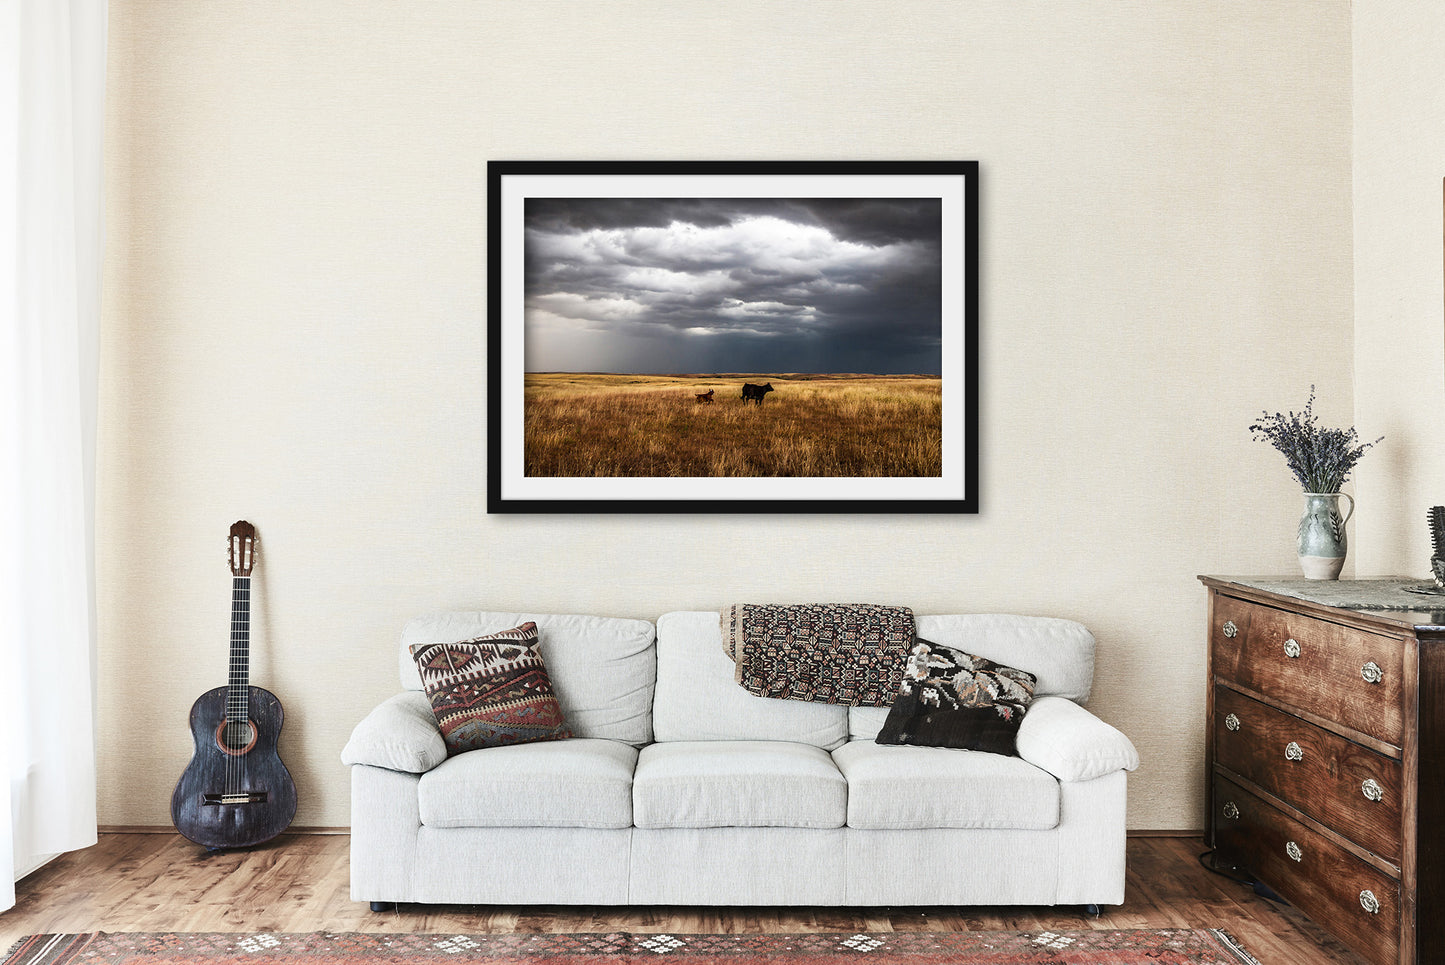 Framed and Matted Print - Picture of Cow and Playful Calf on Stormy Day in Oklahoma - Country Farmhouse Wall Art Farm Ranch Decor